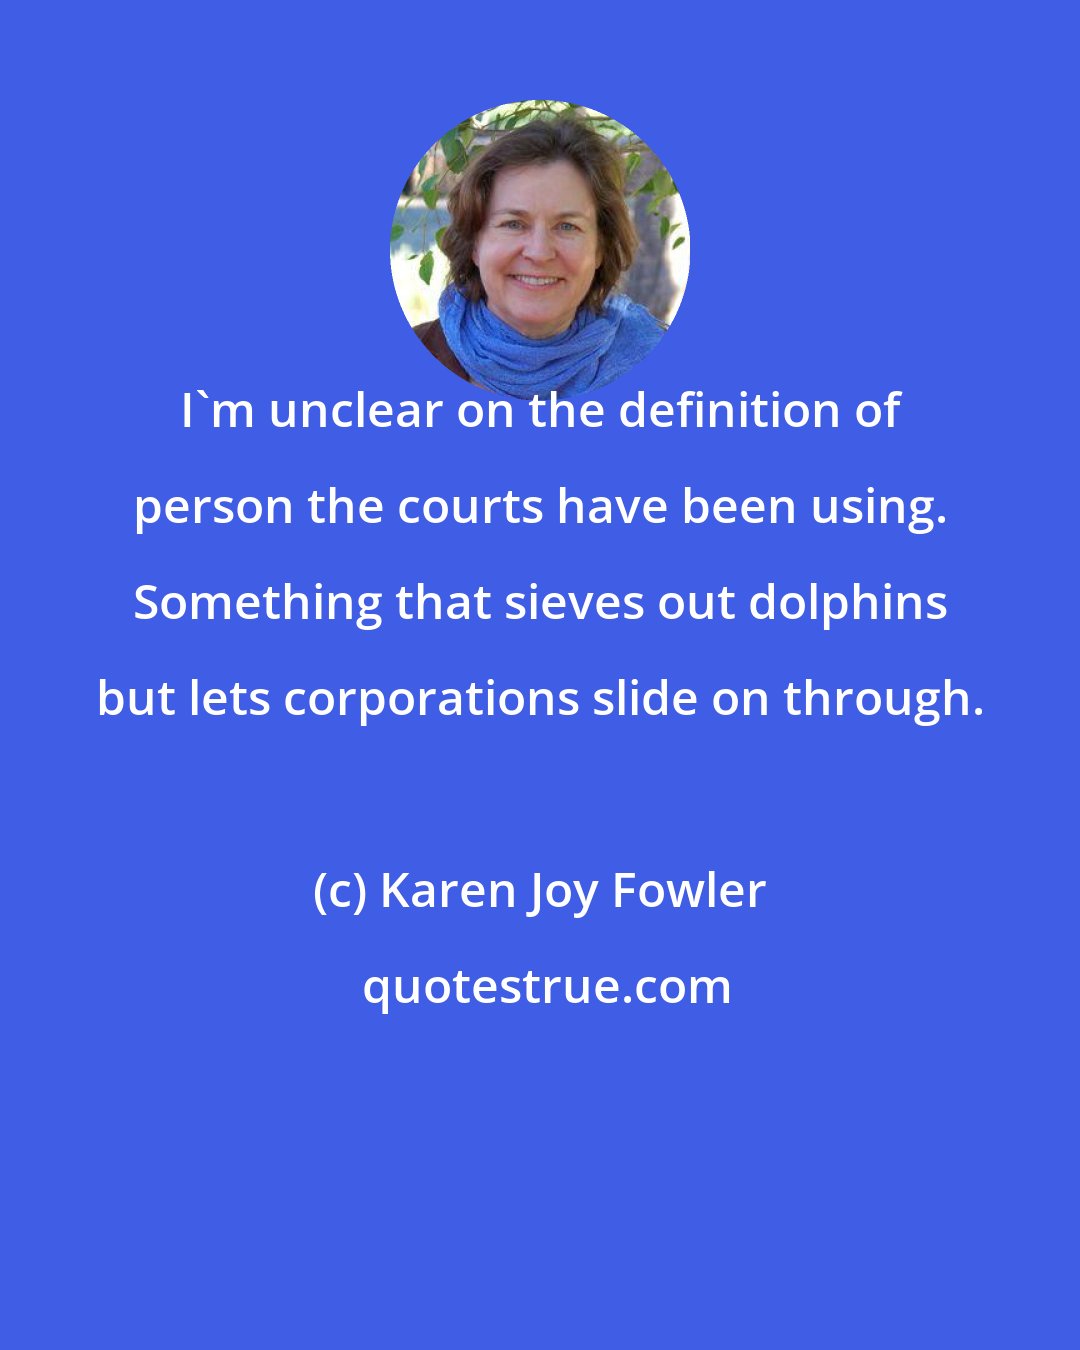 Karen Joy Fowler: I'm unclear on the definition of person the courts have been using. Something that sieves out dolphins but lets corporations slide on through.